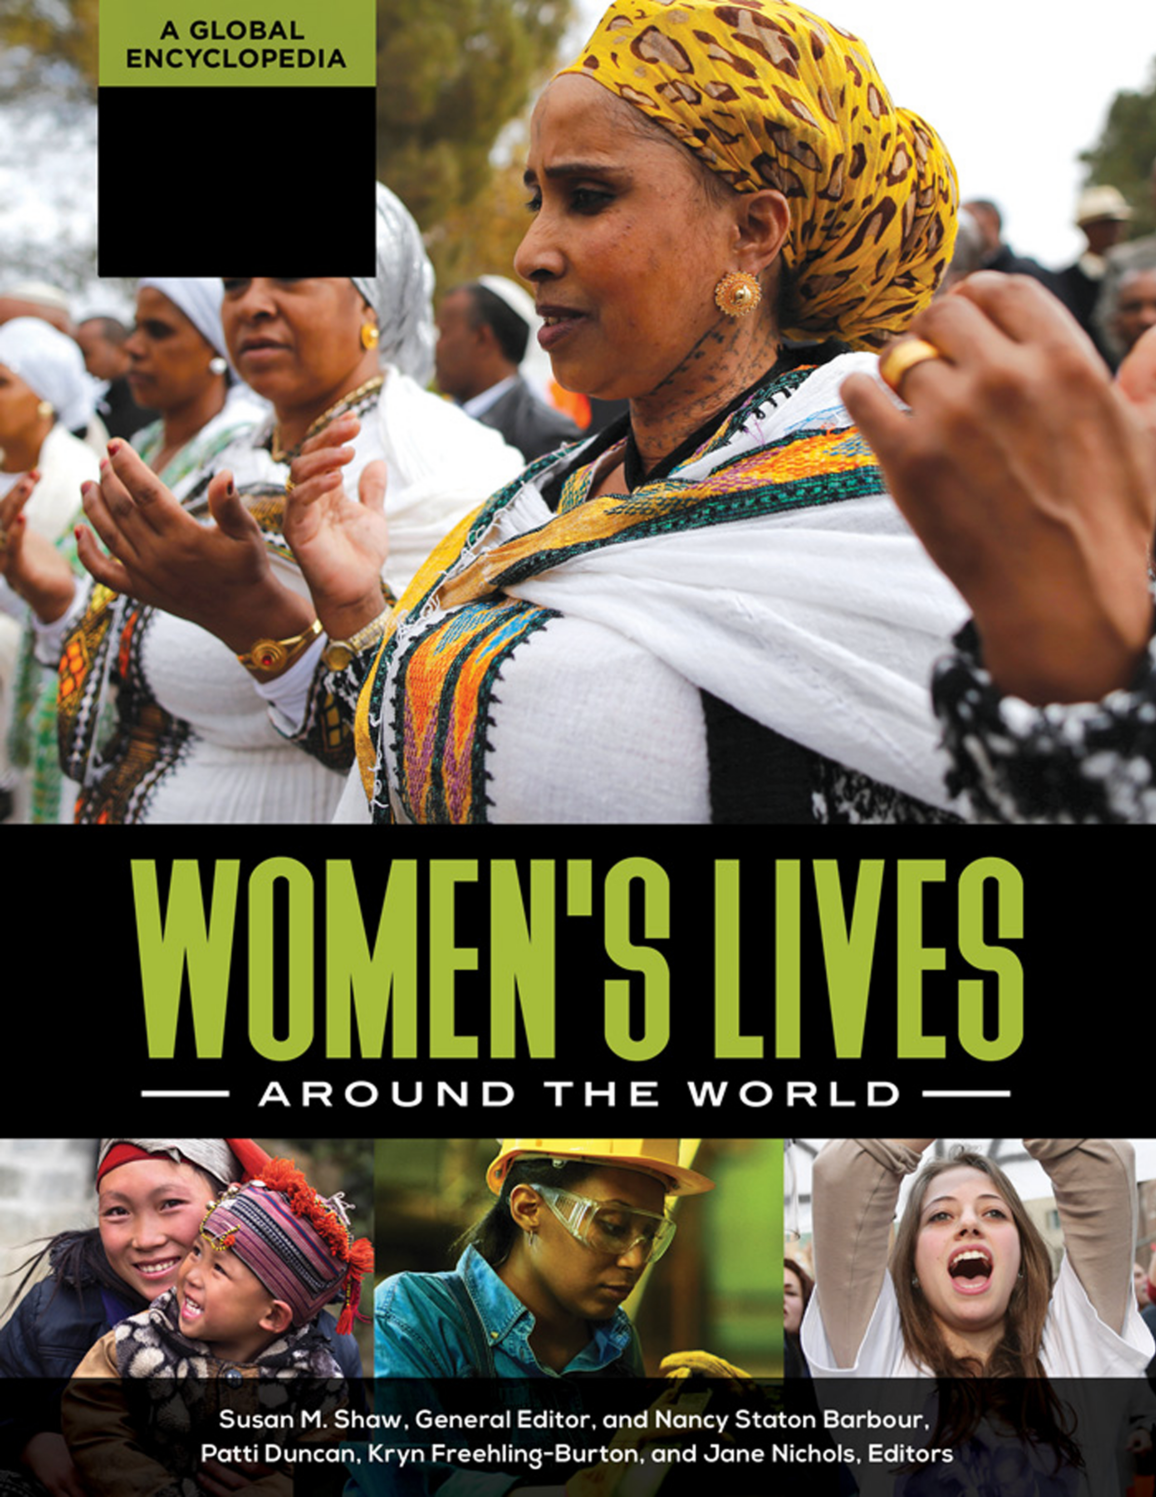 Women's Lives around the World: A Global Encyclopedia [4 volumes] page Cover1